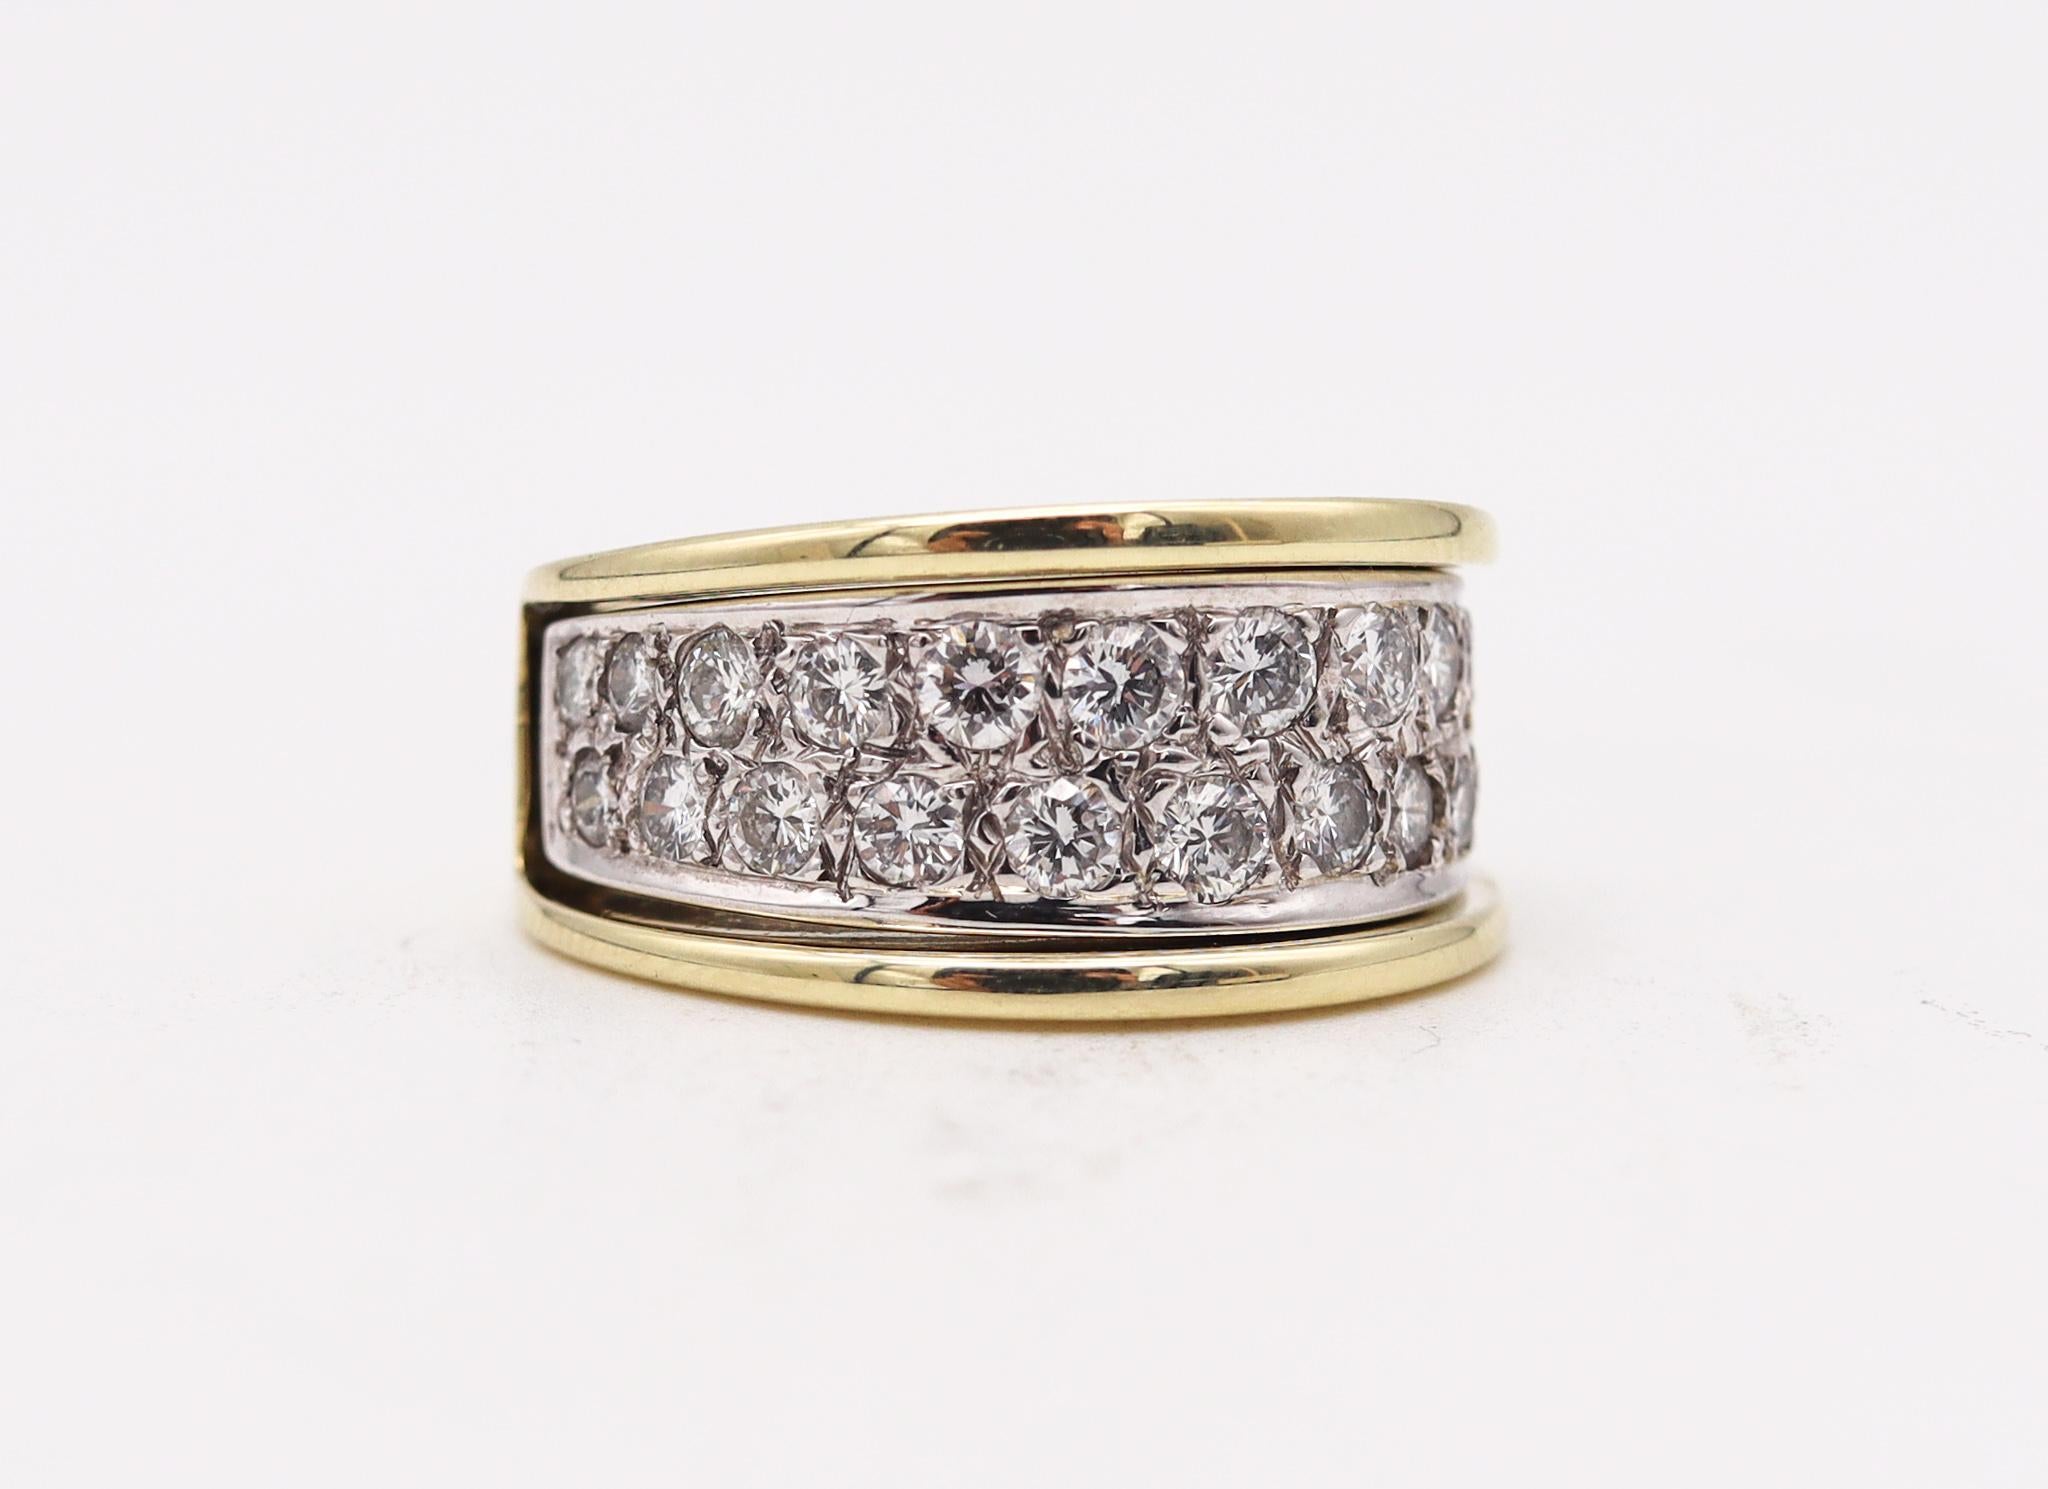 Modernist Jose Hess Convertible Two Tones Ring In 14Kt Gold With 1.80 Ctw In VS Diamonds